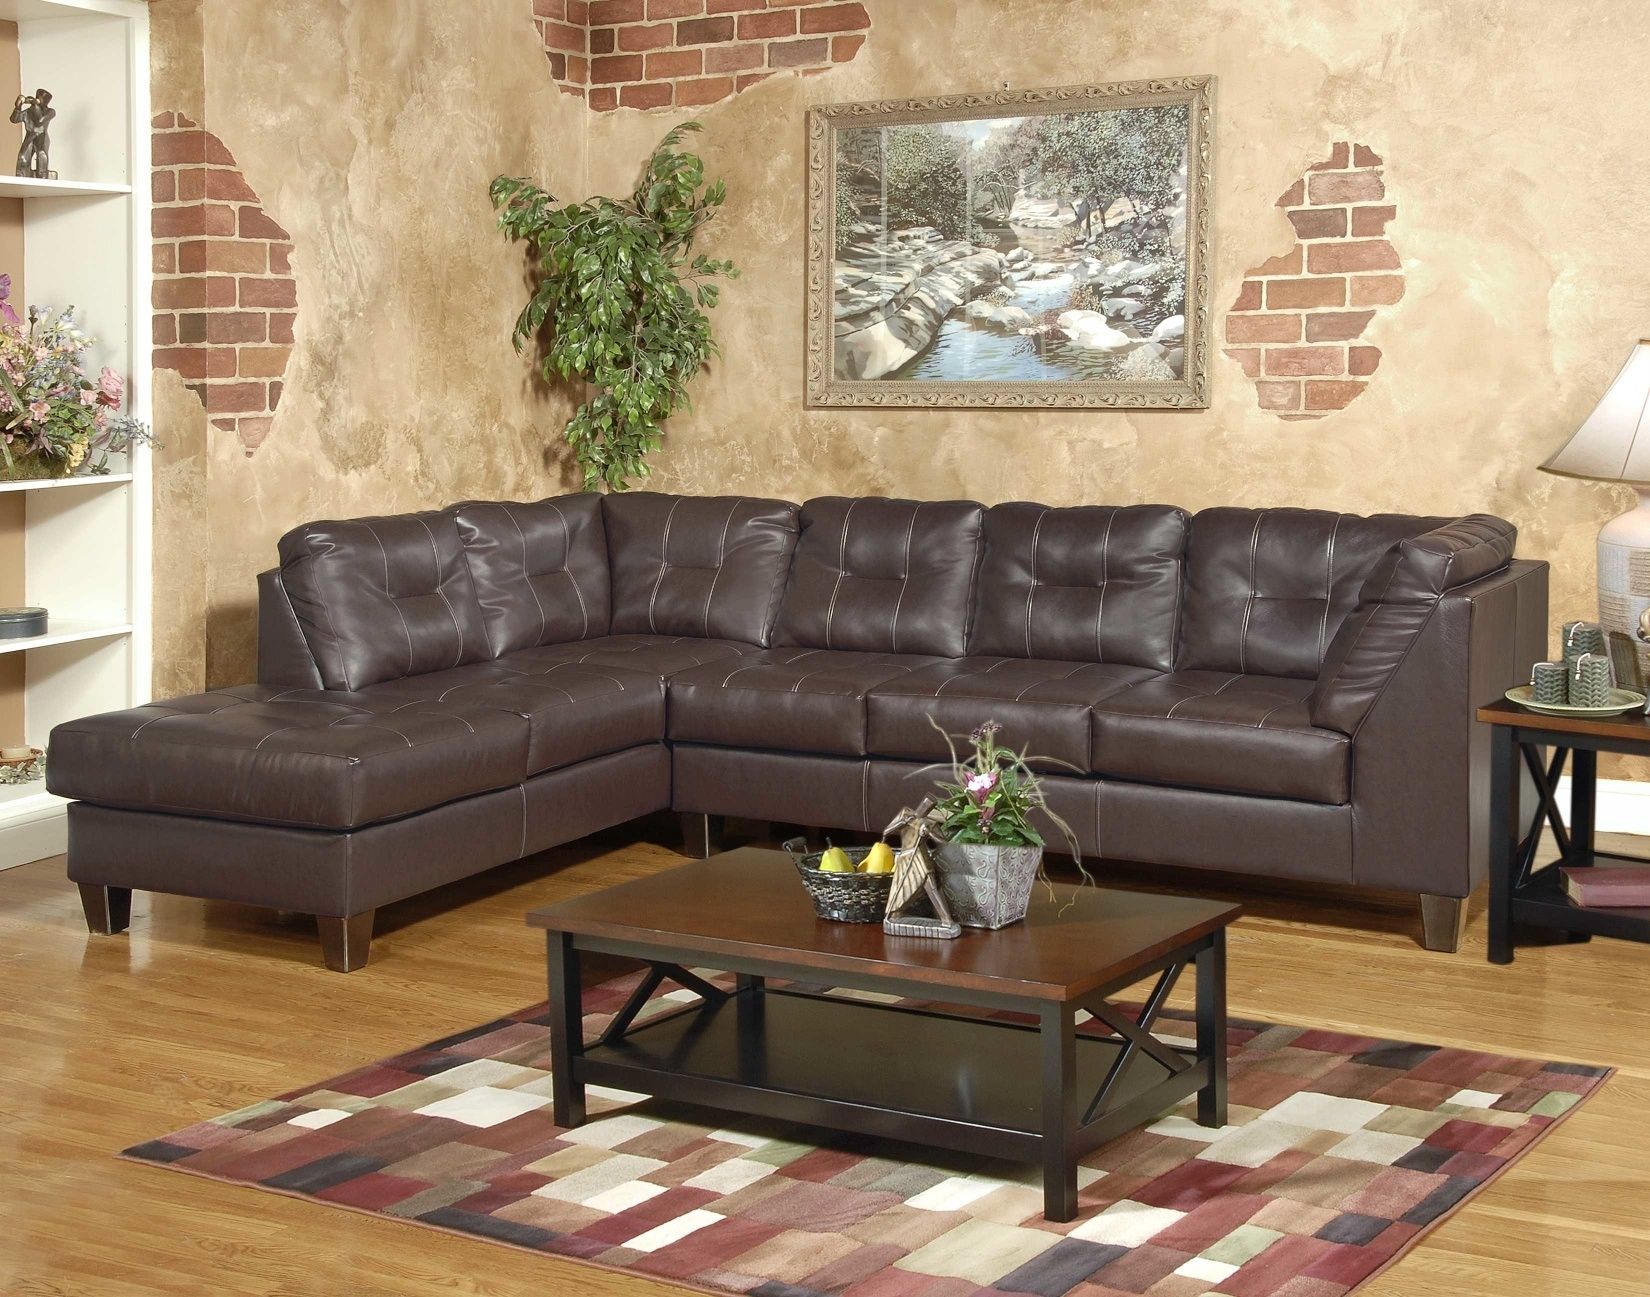 Discount Furniture And Mattresses – Tallahassee Furniture Direct With Regard To Tallahassee Sectional Sofas (View 7 of 10)